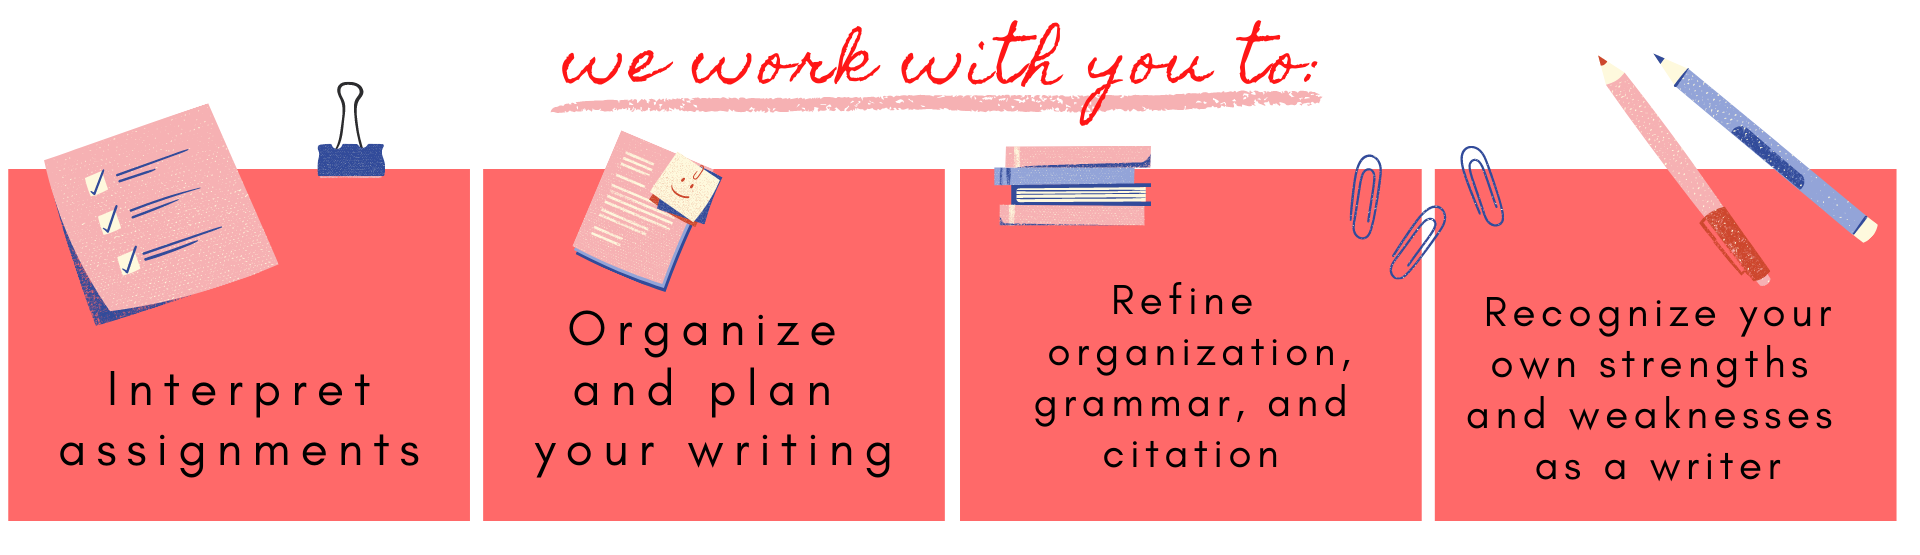 We work with you to interpret assignments; organize and plan your writing process; refine organization, argument, grammar, and citation; and recognize your own strengths and weaknesses as a writer.